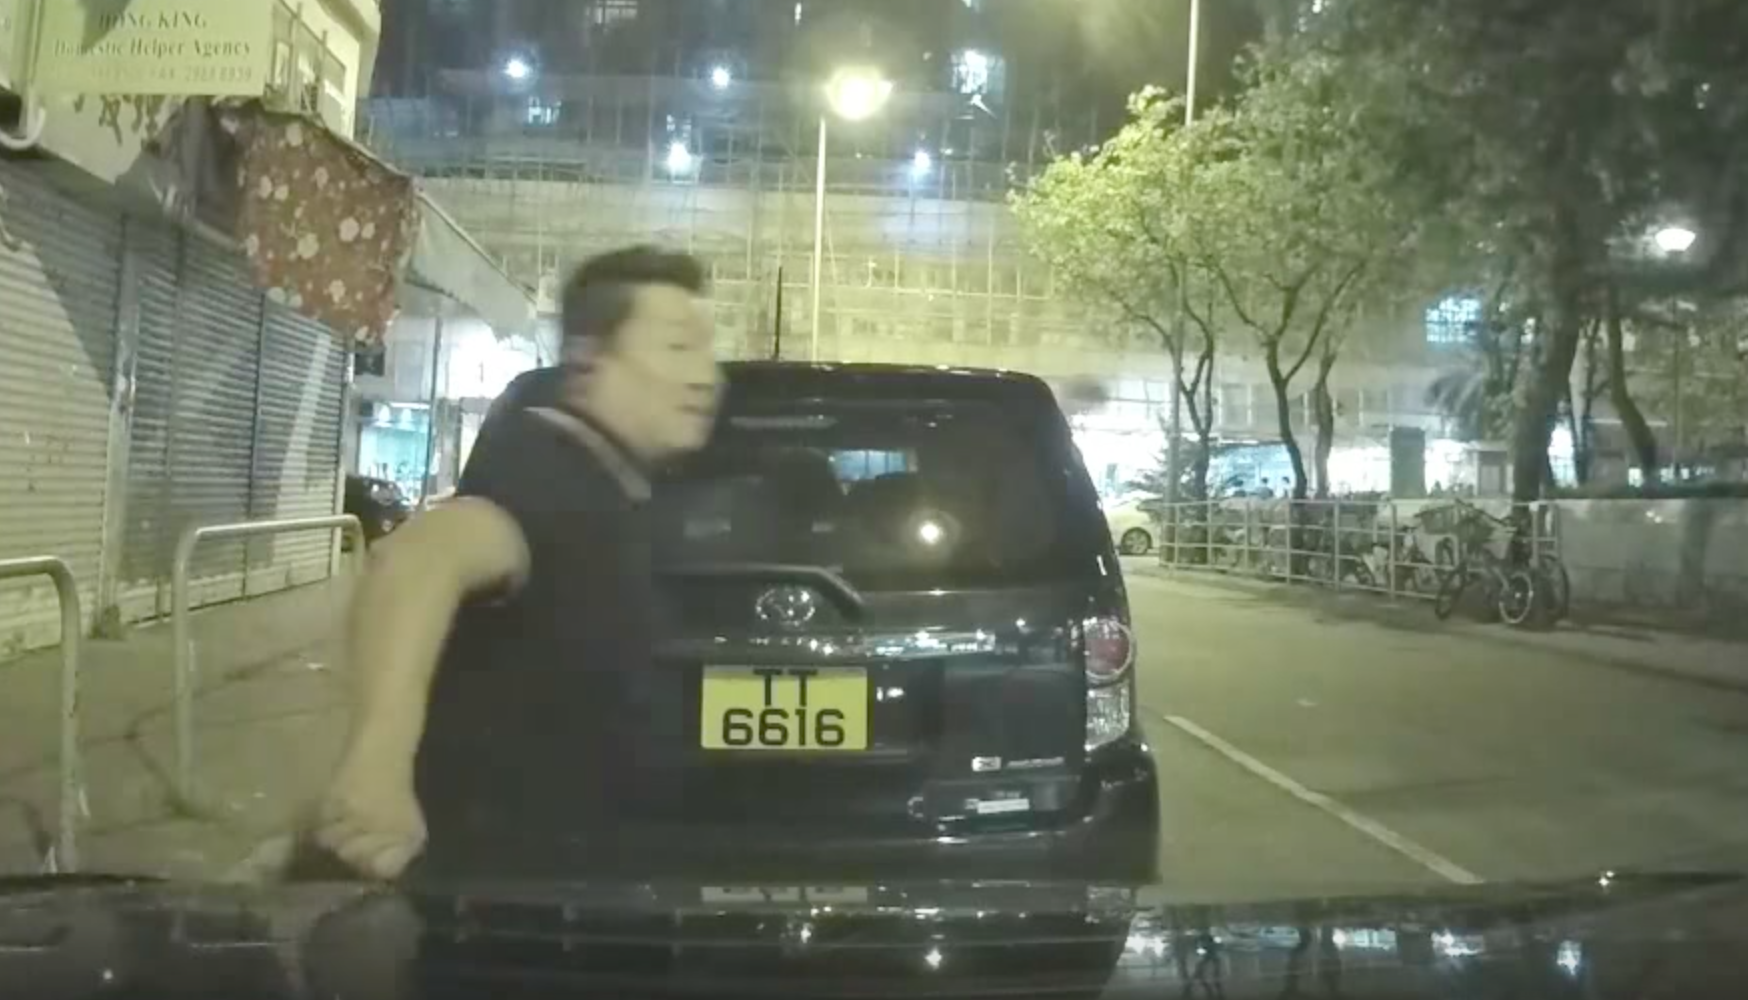 Clip from video of man keying car in Tuen Mun